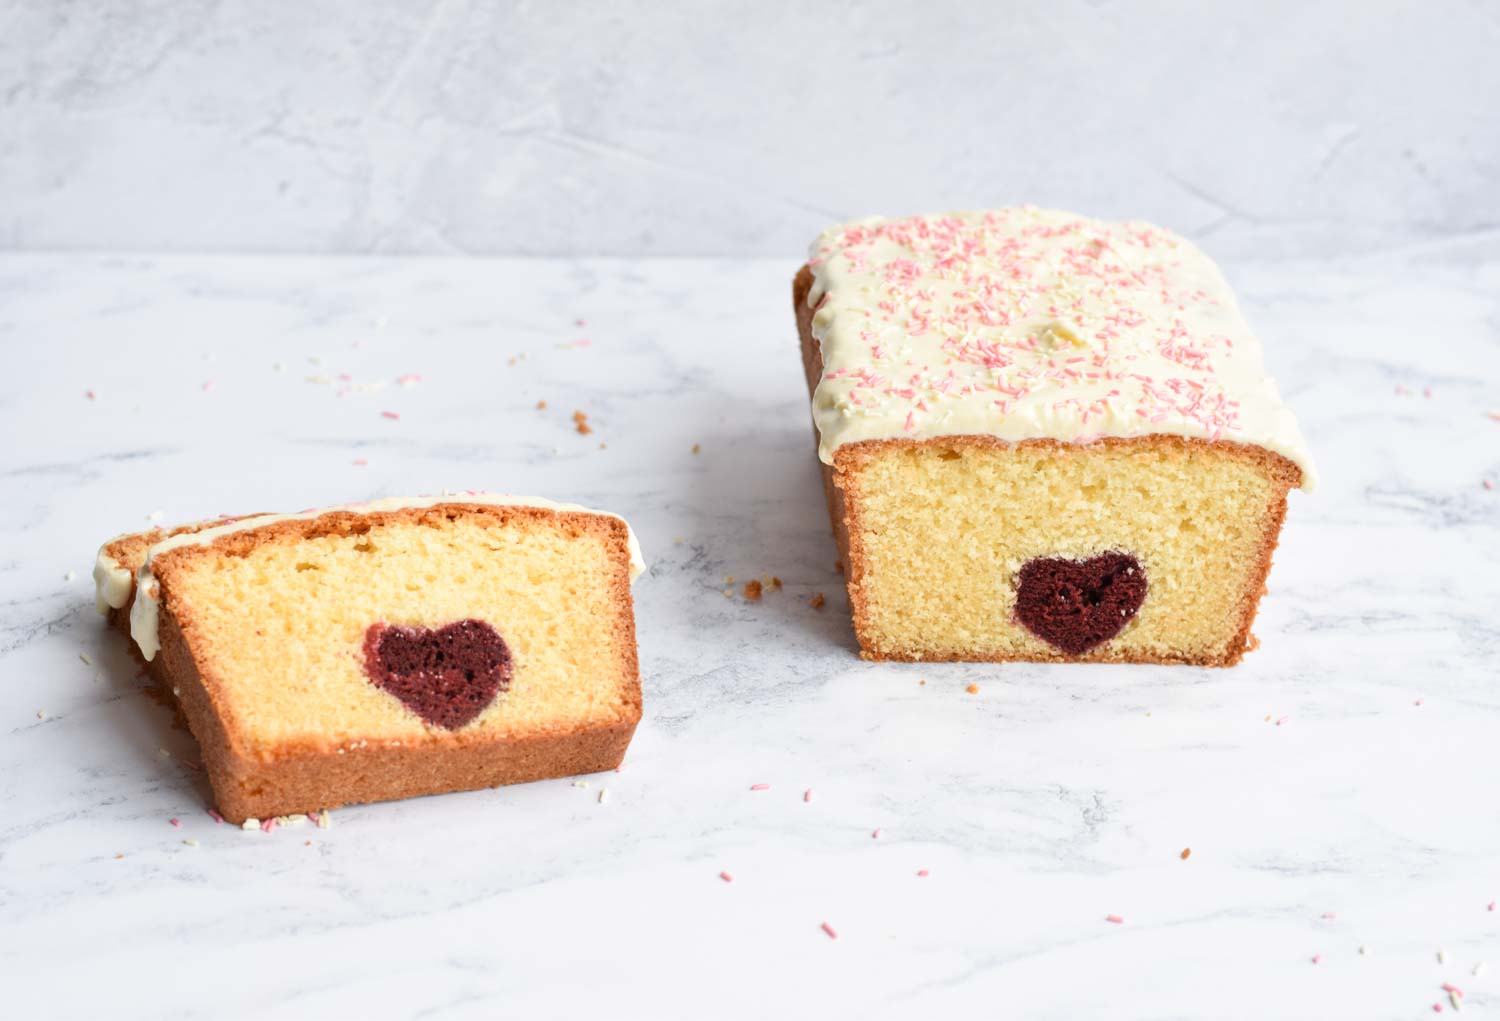 A gluten-free Valentine's cake with a red heart inside